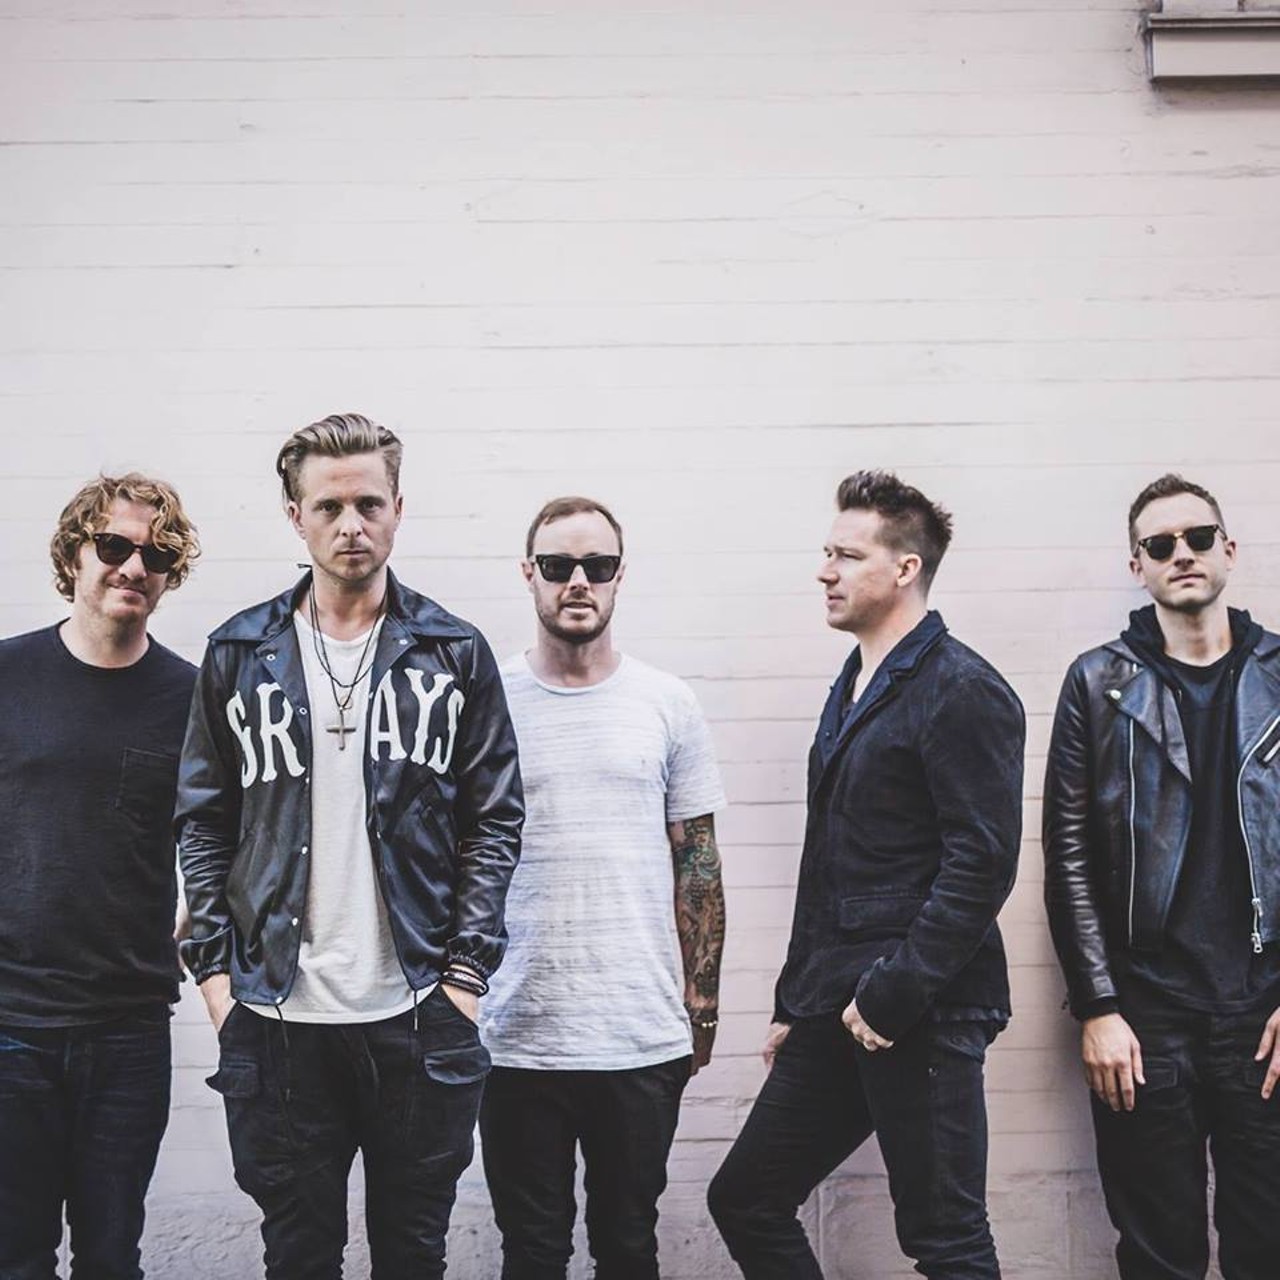 2017 Honda Civic Tour featuring OneRepublic
Wednesday, 7/19
The 2017 Honda Civic Tour features OneRepublic, Fitz & The Tantrums and James Arthur. With all three artists having released music in 2016 and OneRepublic releasing their latest single &#147;No Vacancy&#148; in April, 2017, this show is a must see for this summer.
7:00 p.m.; DTE Energy Music Theatre, Clarkston, MI; palacenet.com; tickets start at $21.00.
(Photo courtesy of Facebook)